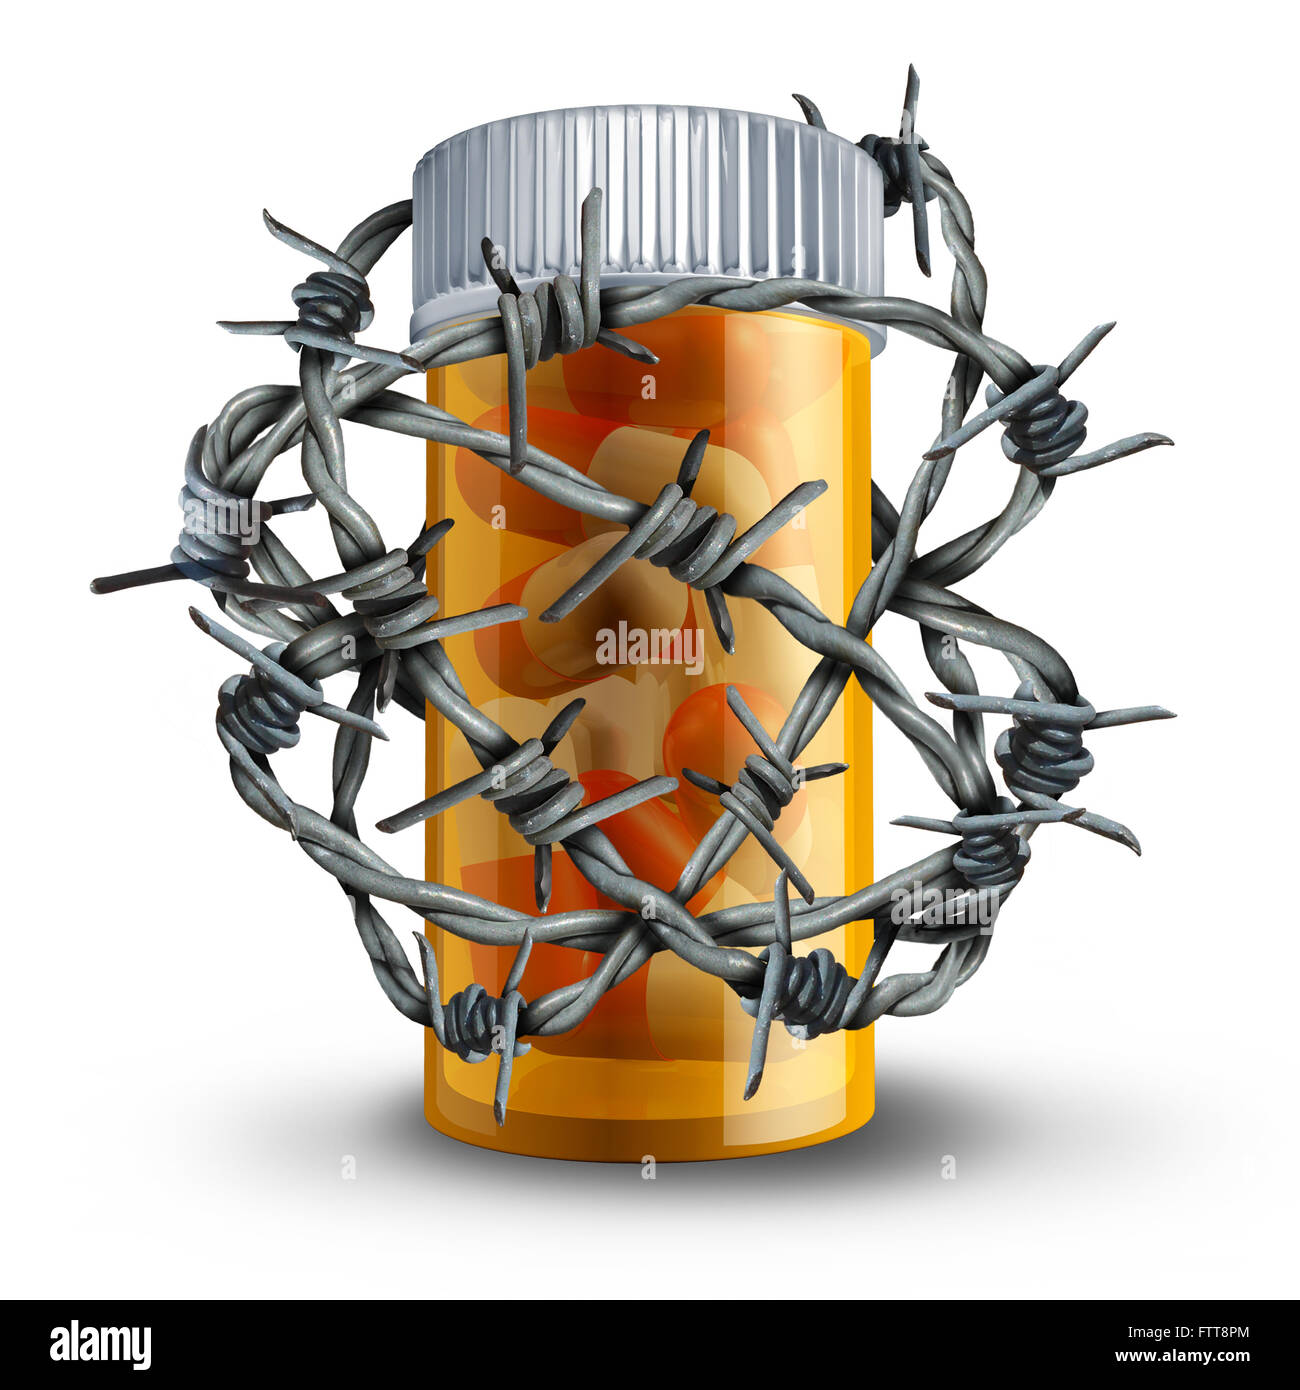 Prescription drug security and medication safety concept as a 3D bottle of pills wrapped with barbed or barb wire as a medical metaphor for pharmacy drugs risk and dosage danger. Stock Photo